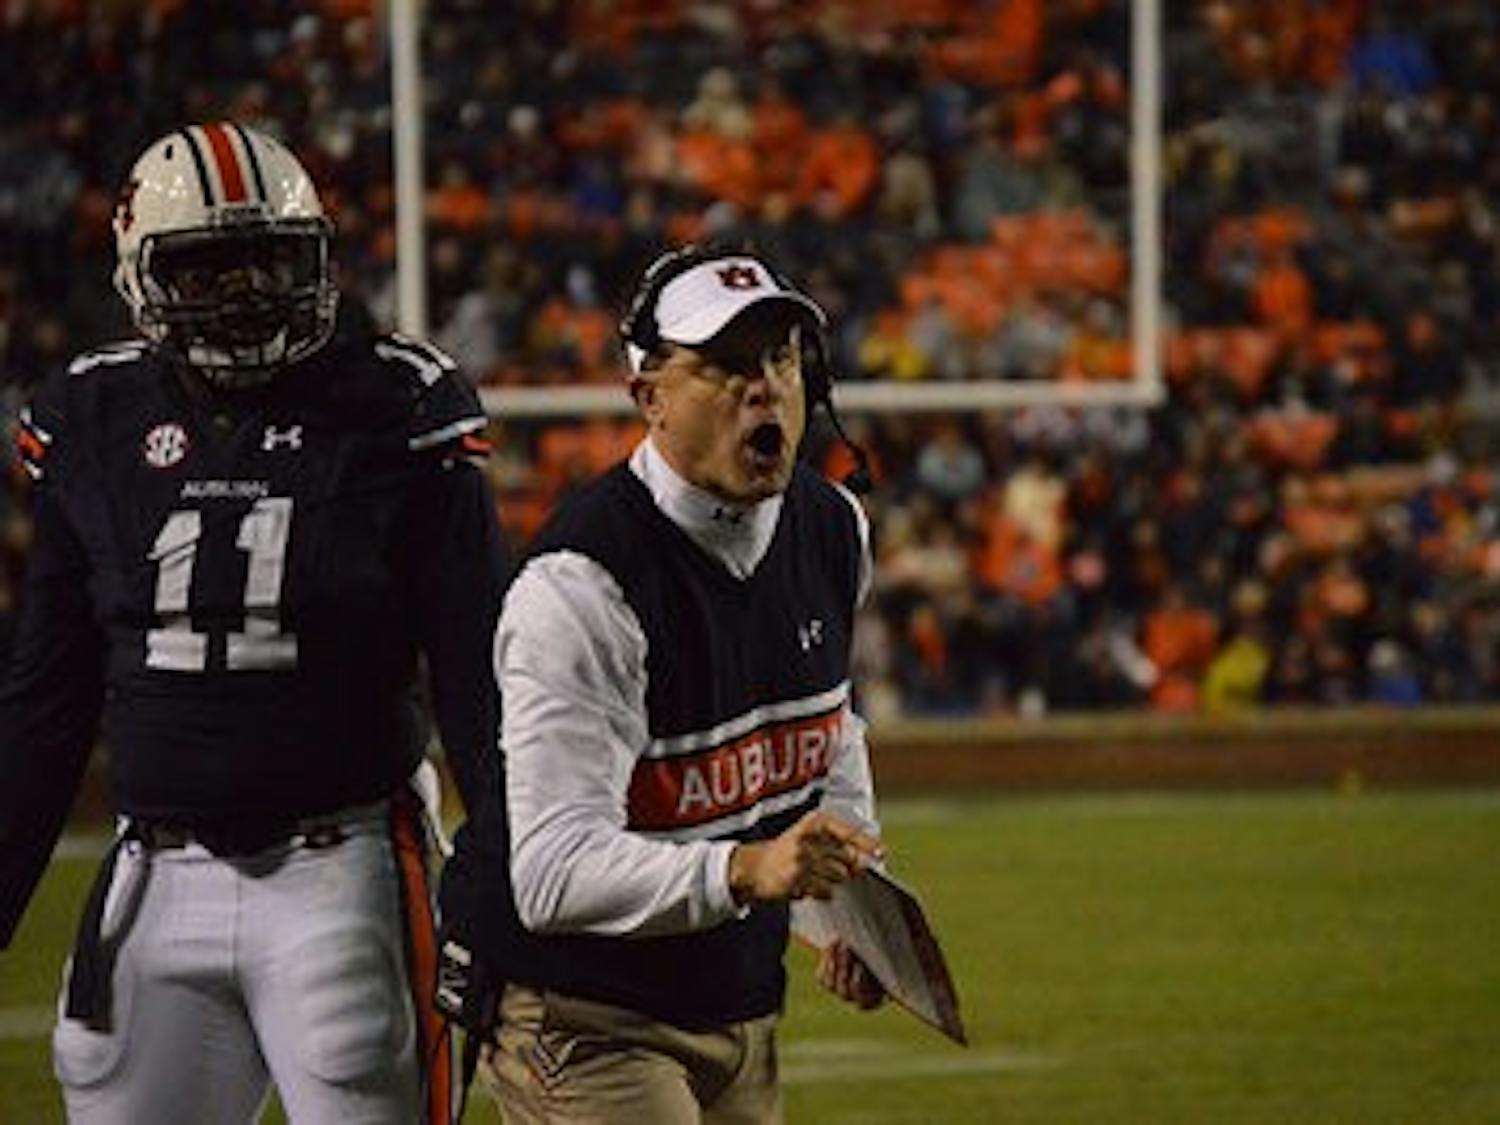 Gus Malzahn reacts to a call.

Emily Enfinger | Assistant Photo Editor